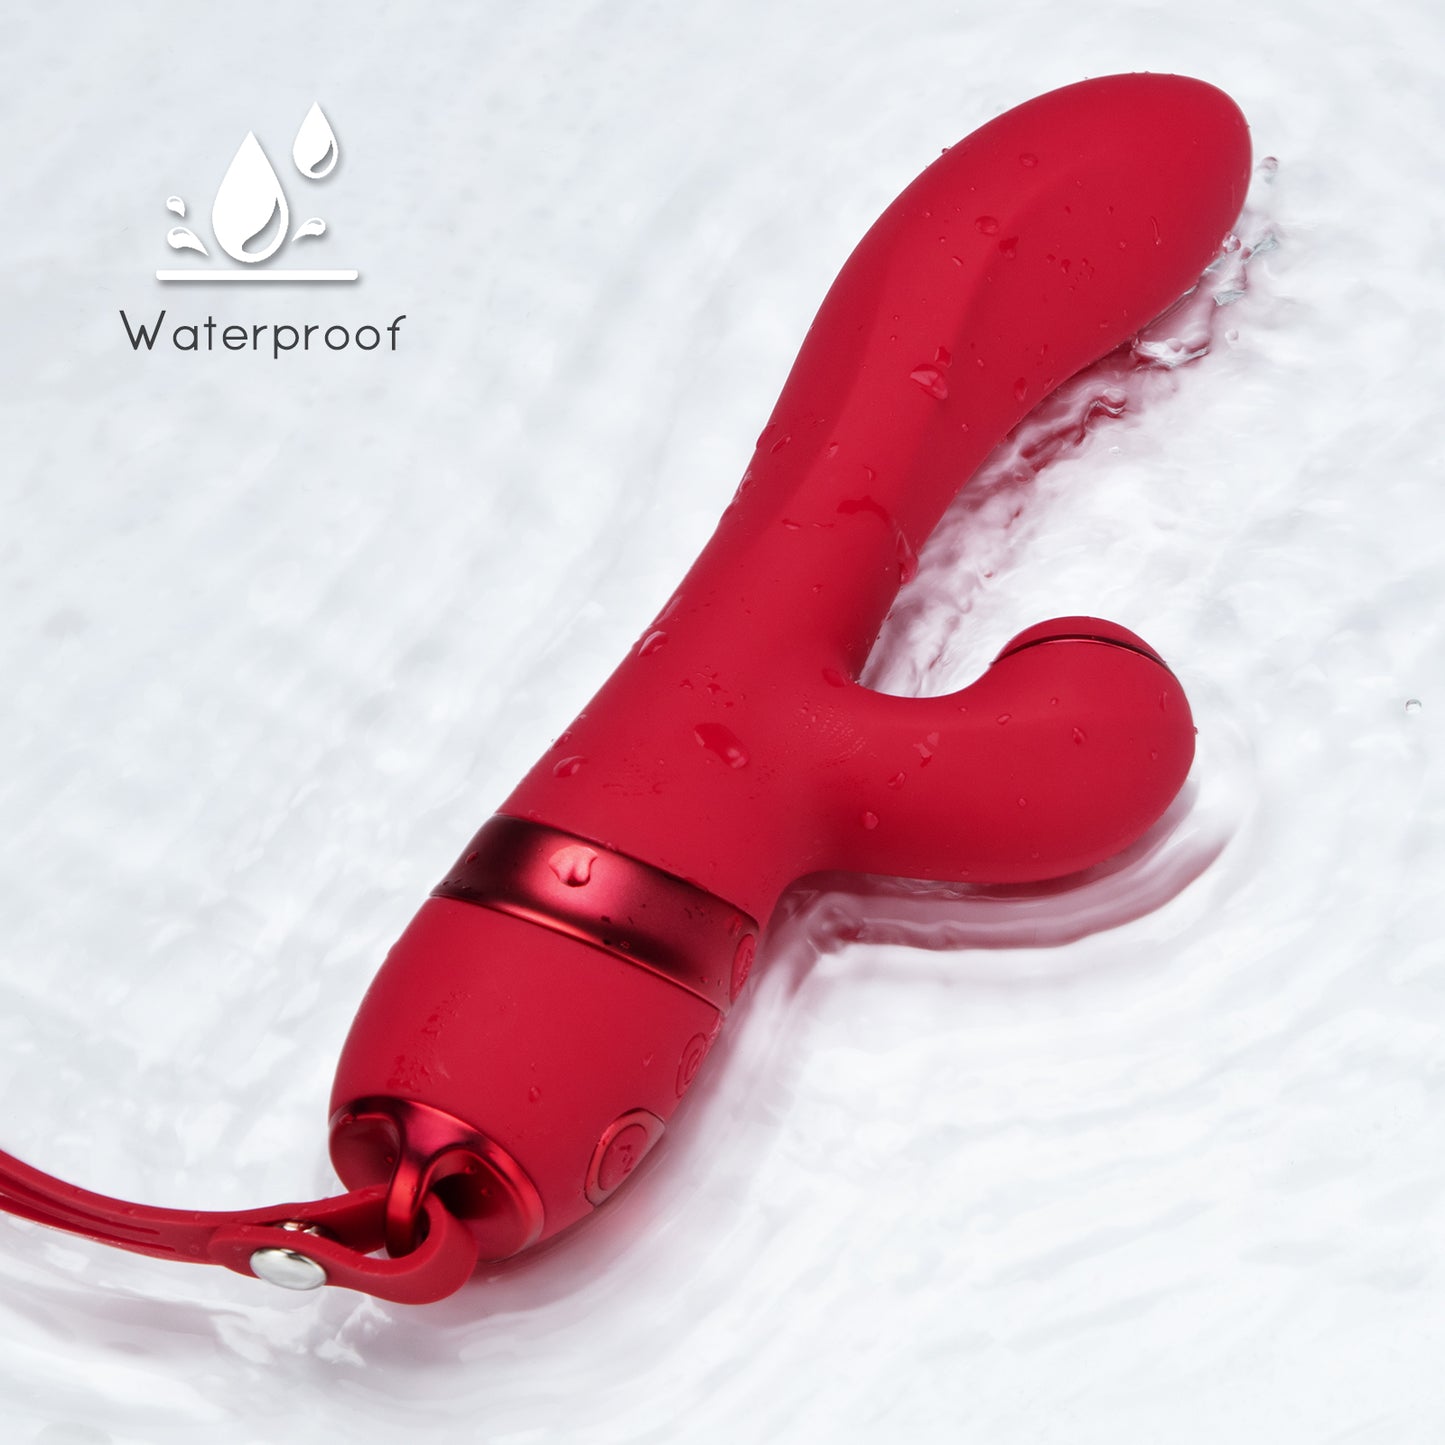 G Spot Clitoral Vibrator with BDSM Whip